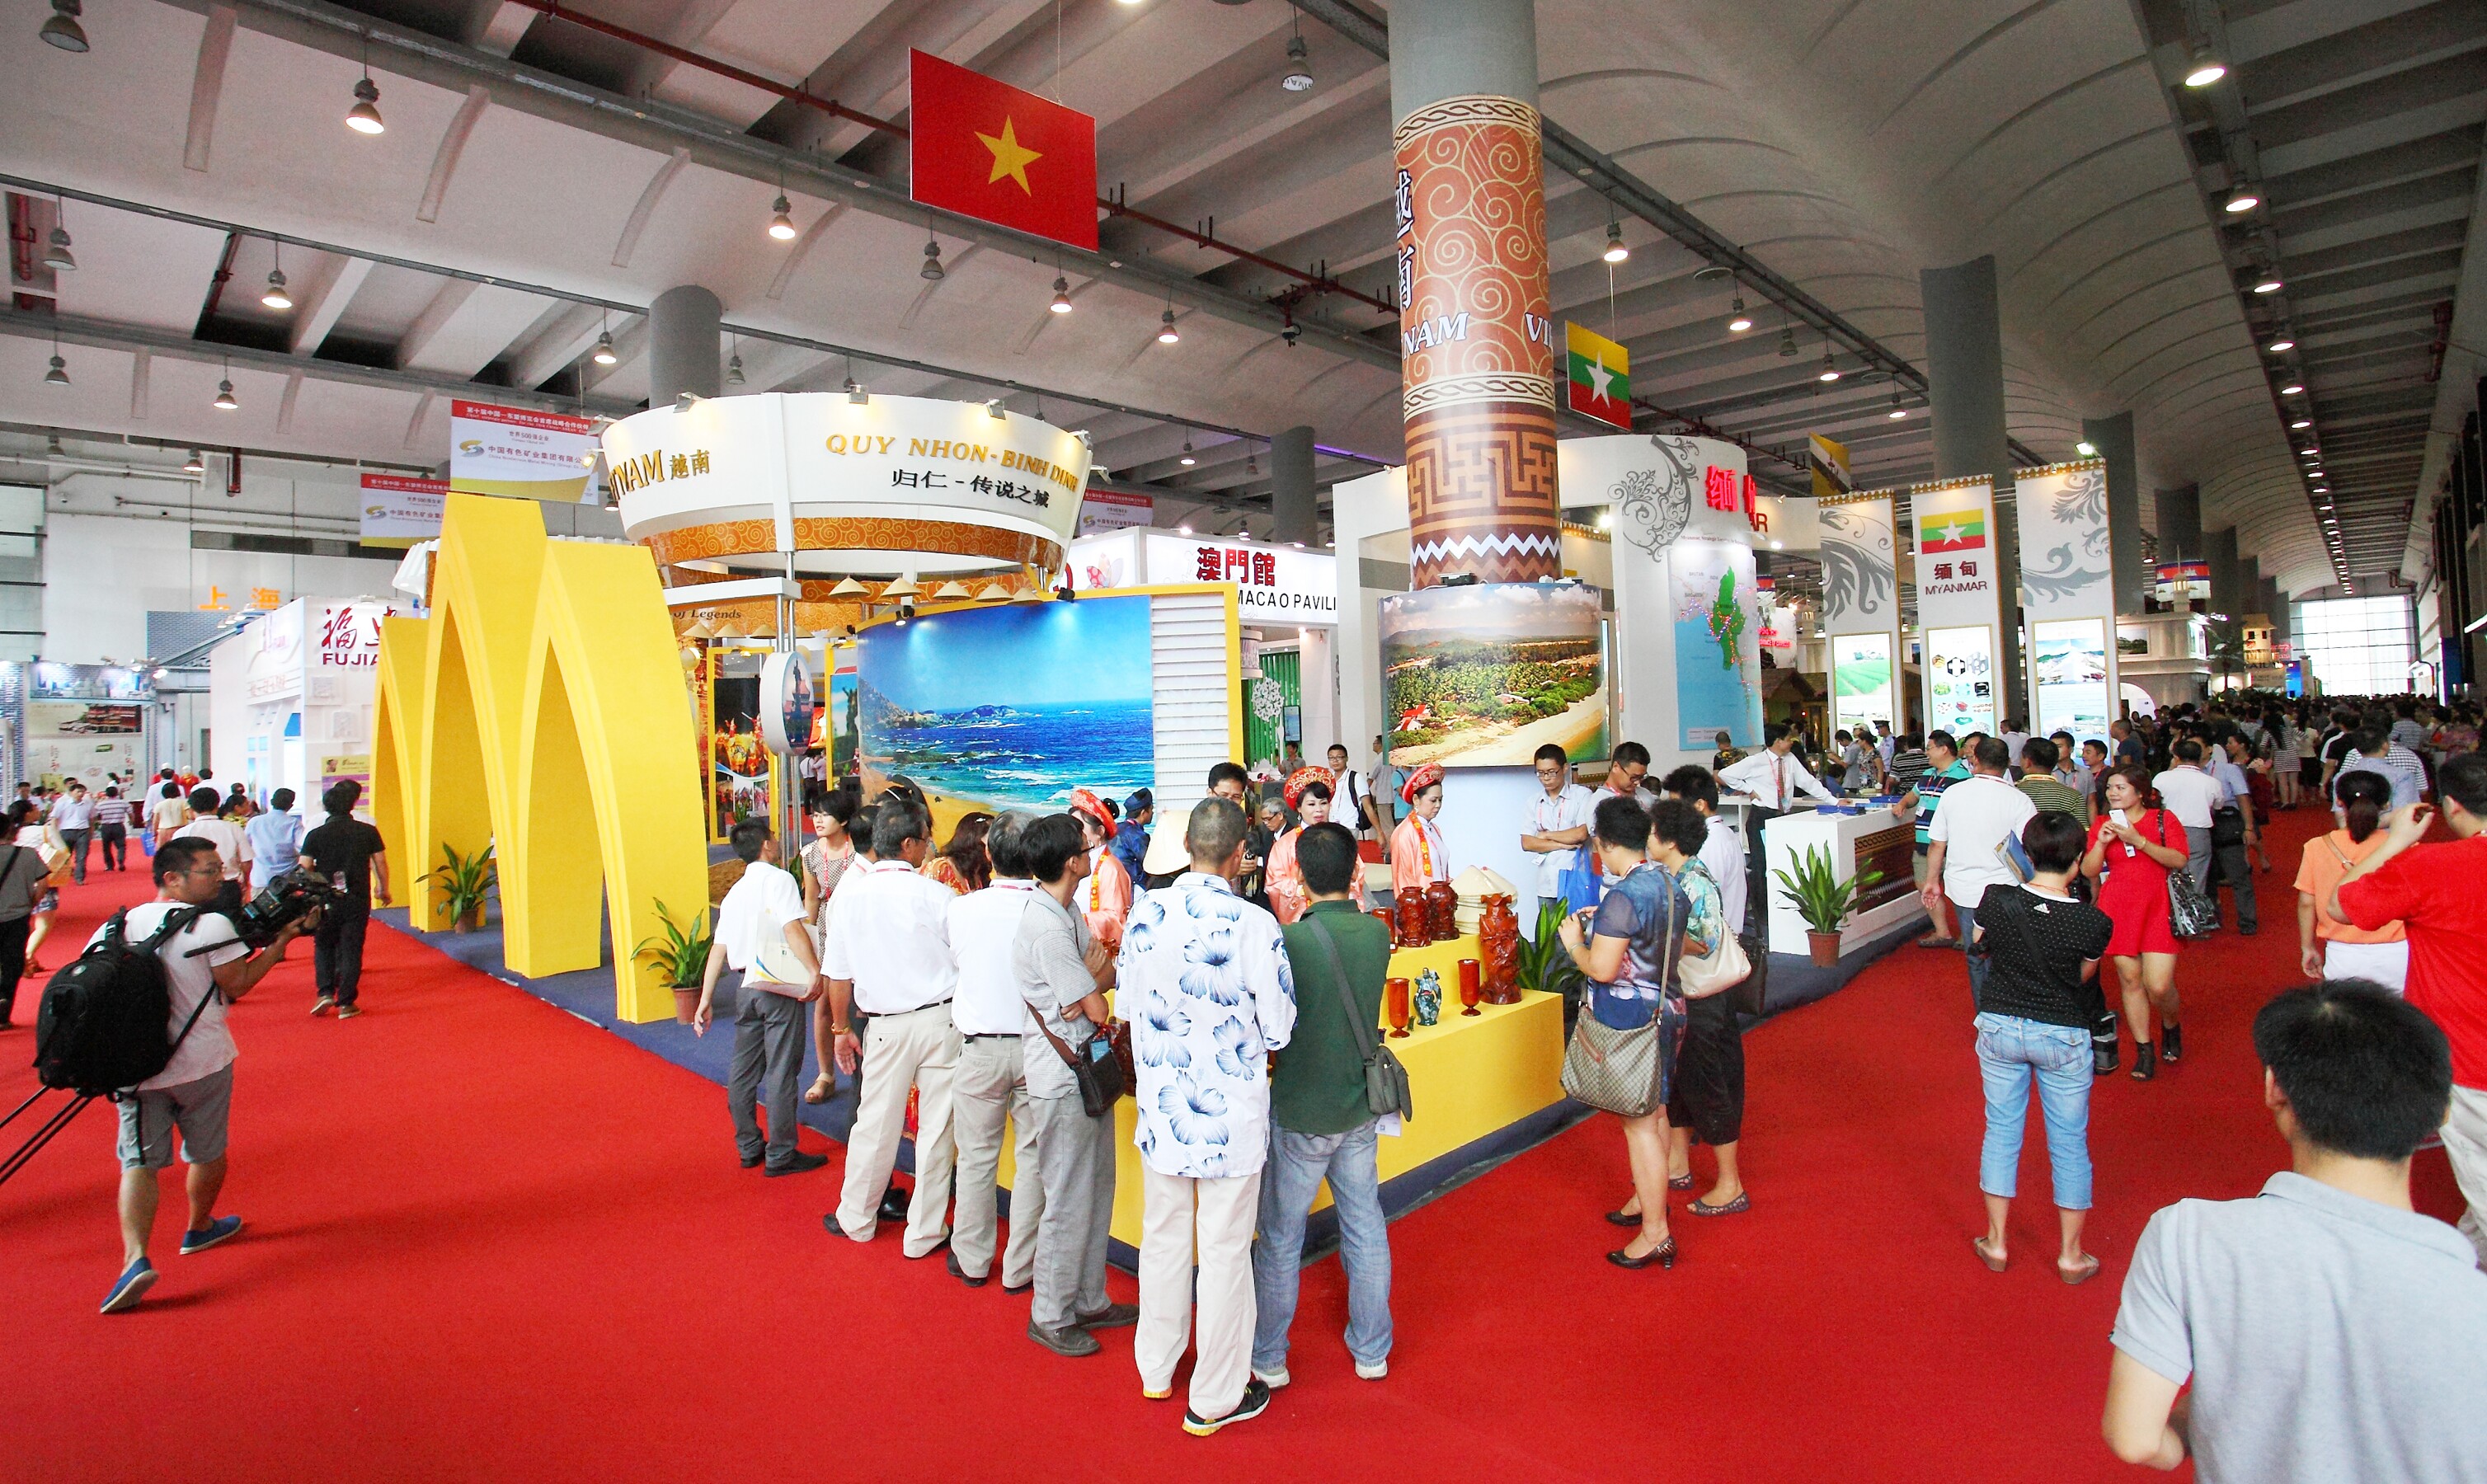 The visitors in the exhibition hall